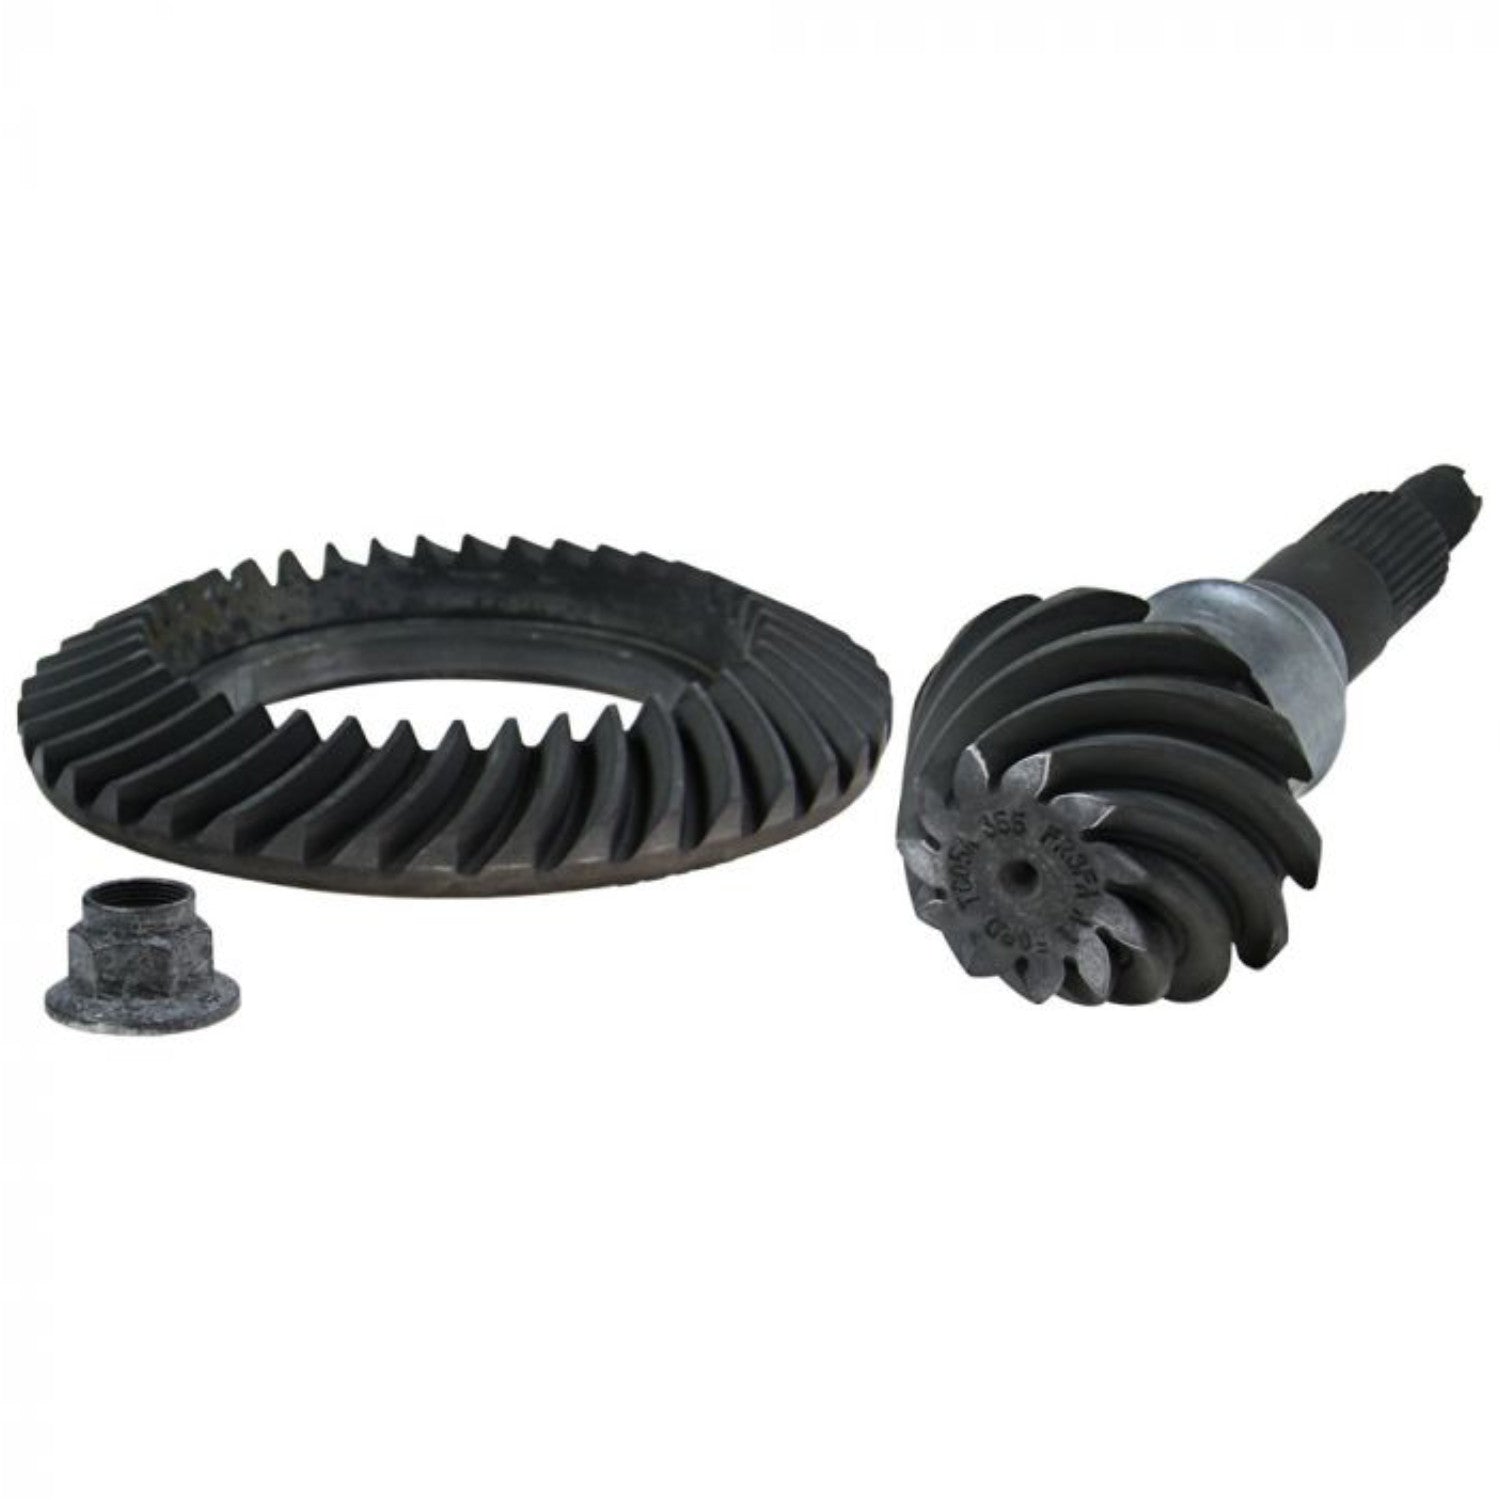 Ford Performance 2015-24 S550 Mustang 8.8" 3.73 IRS Diff Ring and Pinion Gear Set